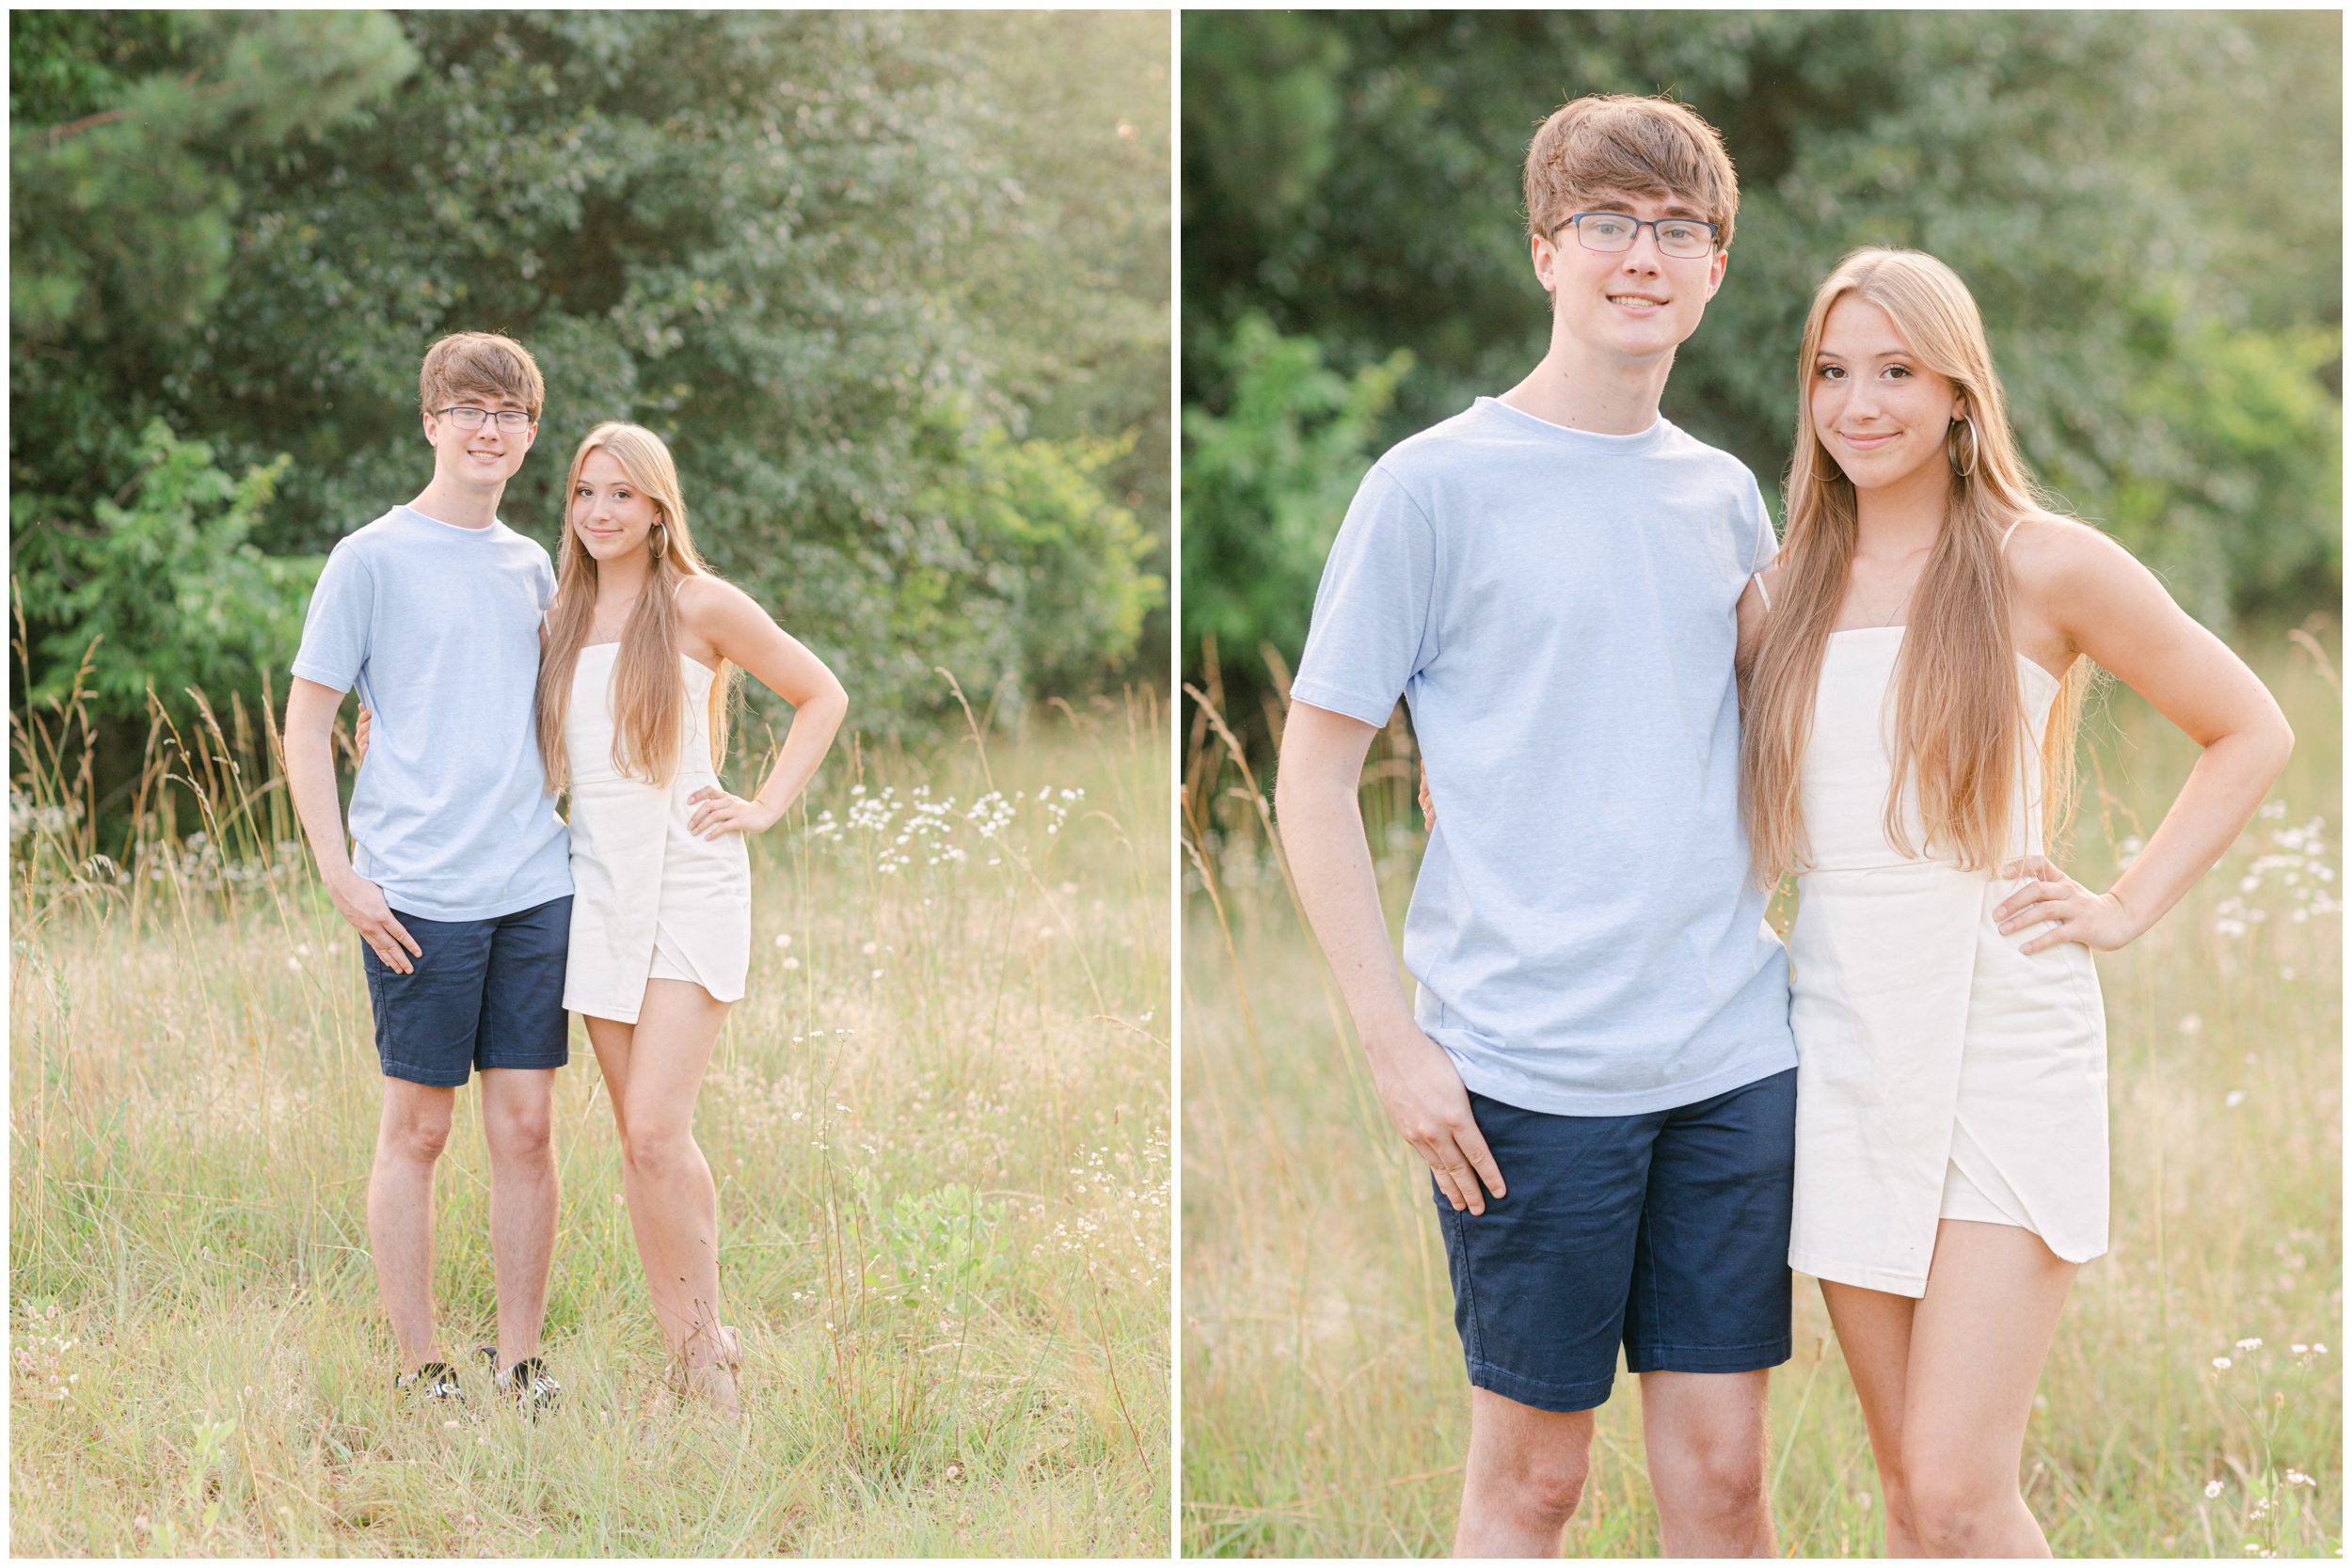 Extended family photographer portraits of older siblings in field in Oconee County, Georgia